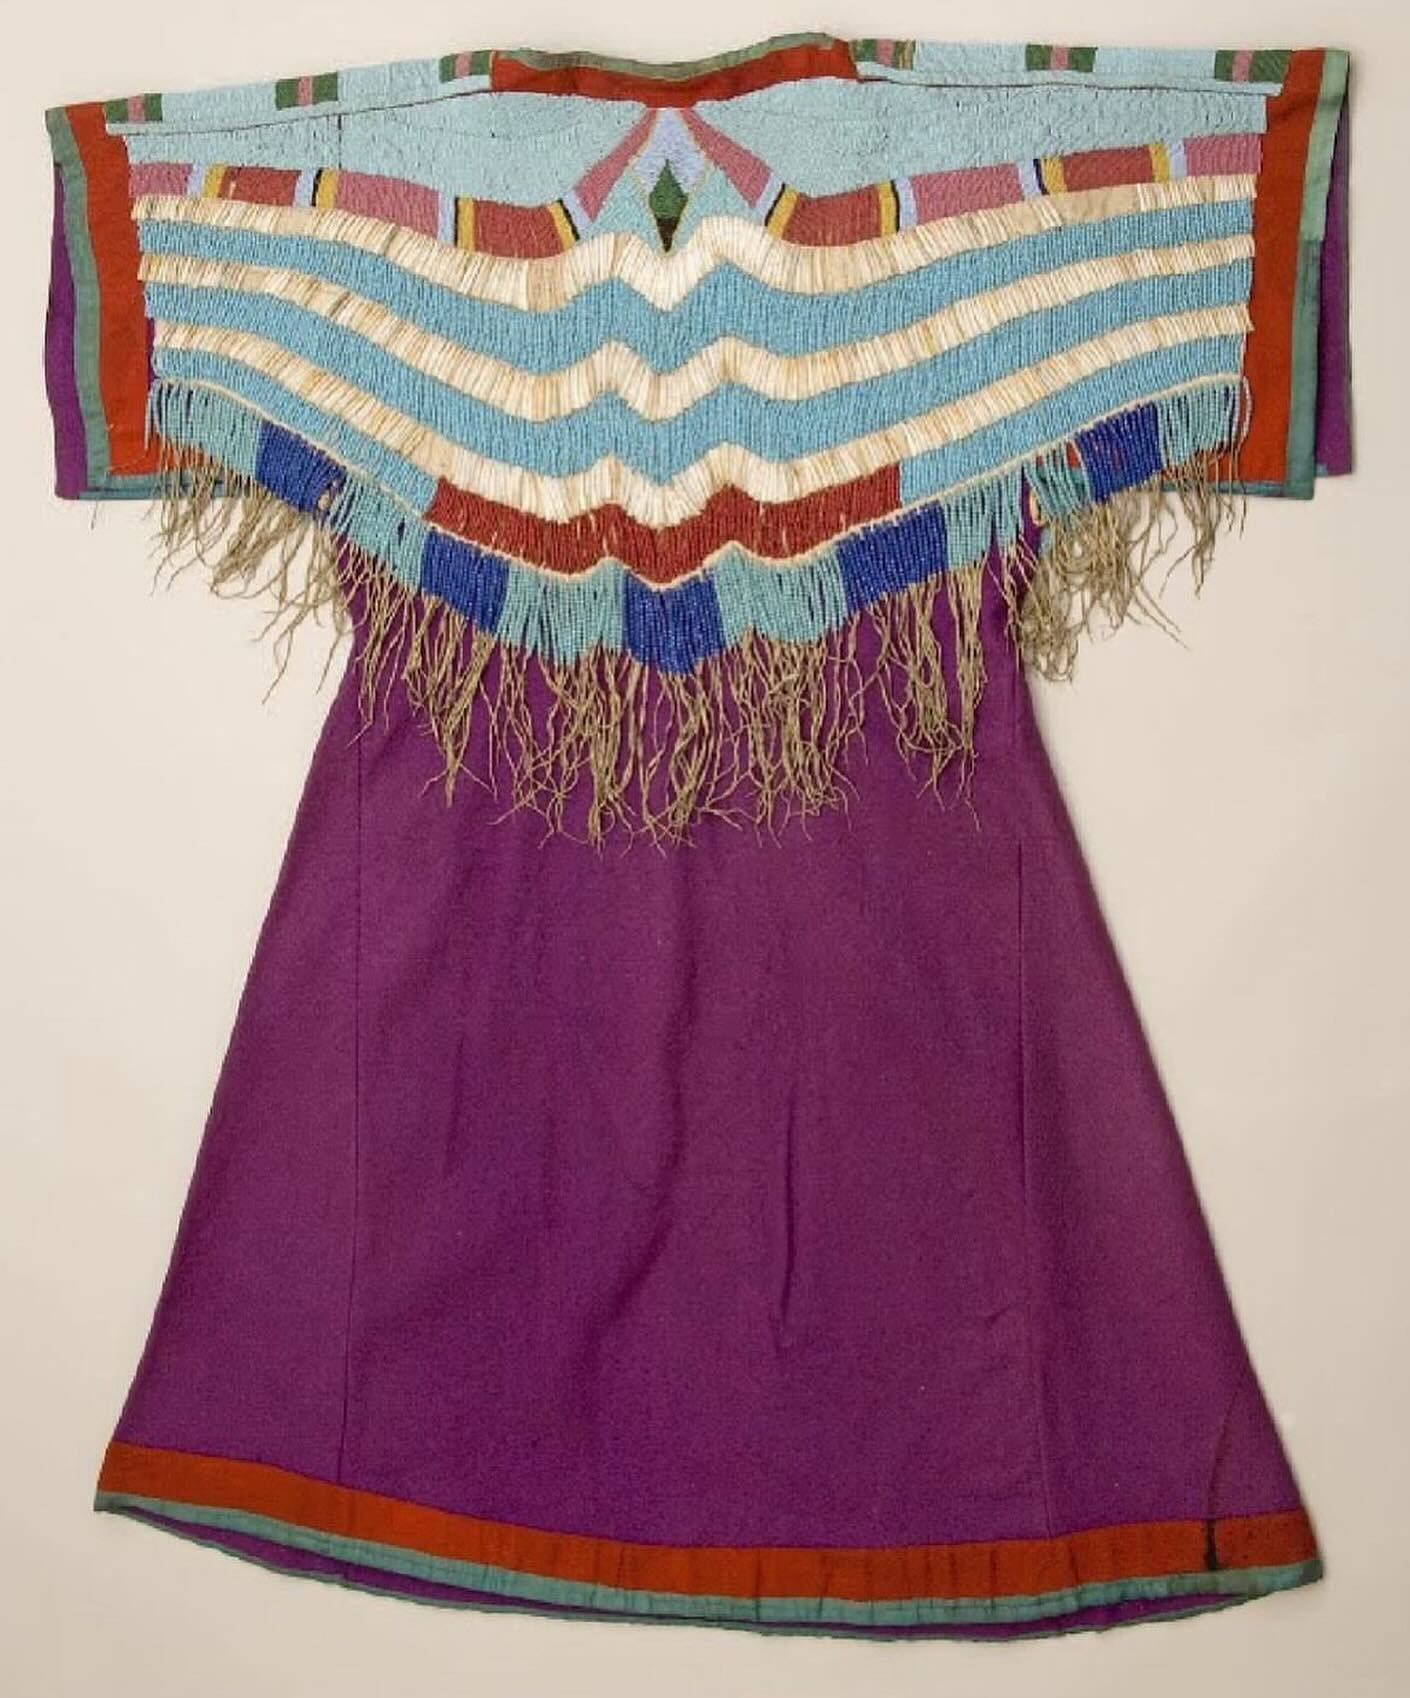 Wonderful colours!
A &ldquo;wing dress&rdquo; made of felt and buffalo hide bands embellished with glass beads. This dress is from the collection of #nezpearce National Historic Park.
RG @the_art_of_dress 

#indigenousfashion #theartofdress #colourin